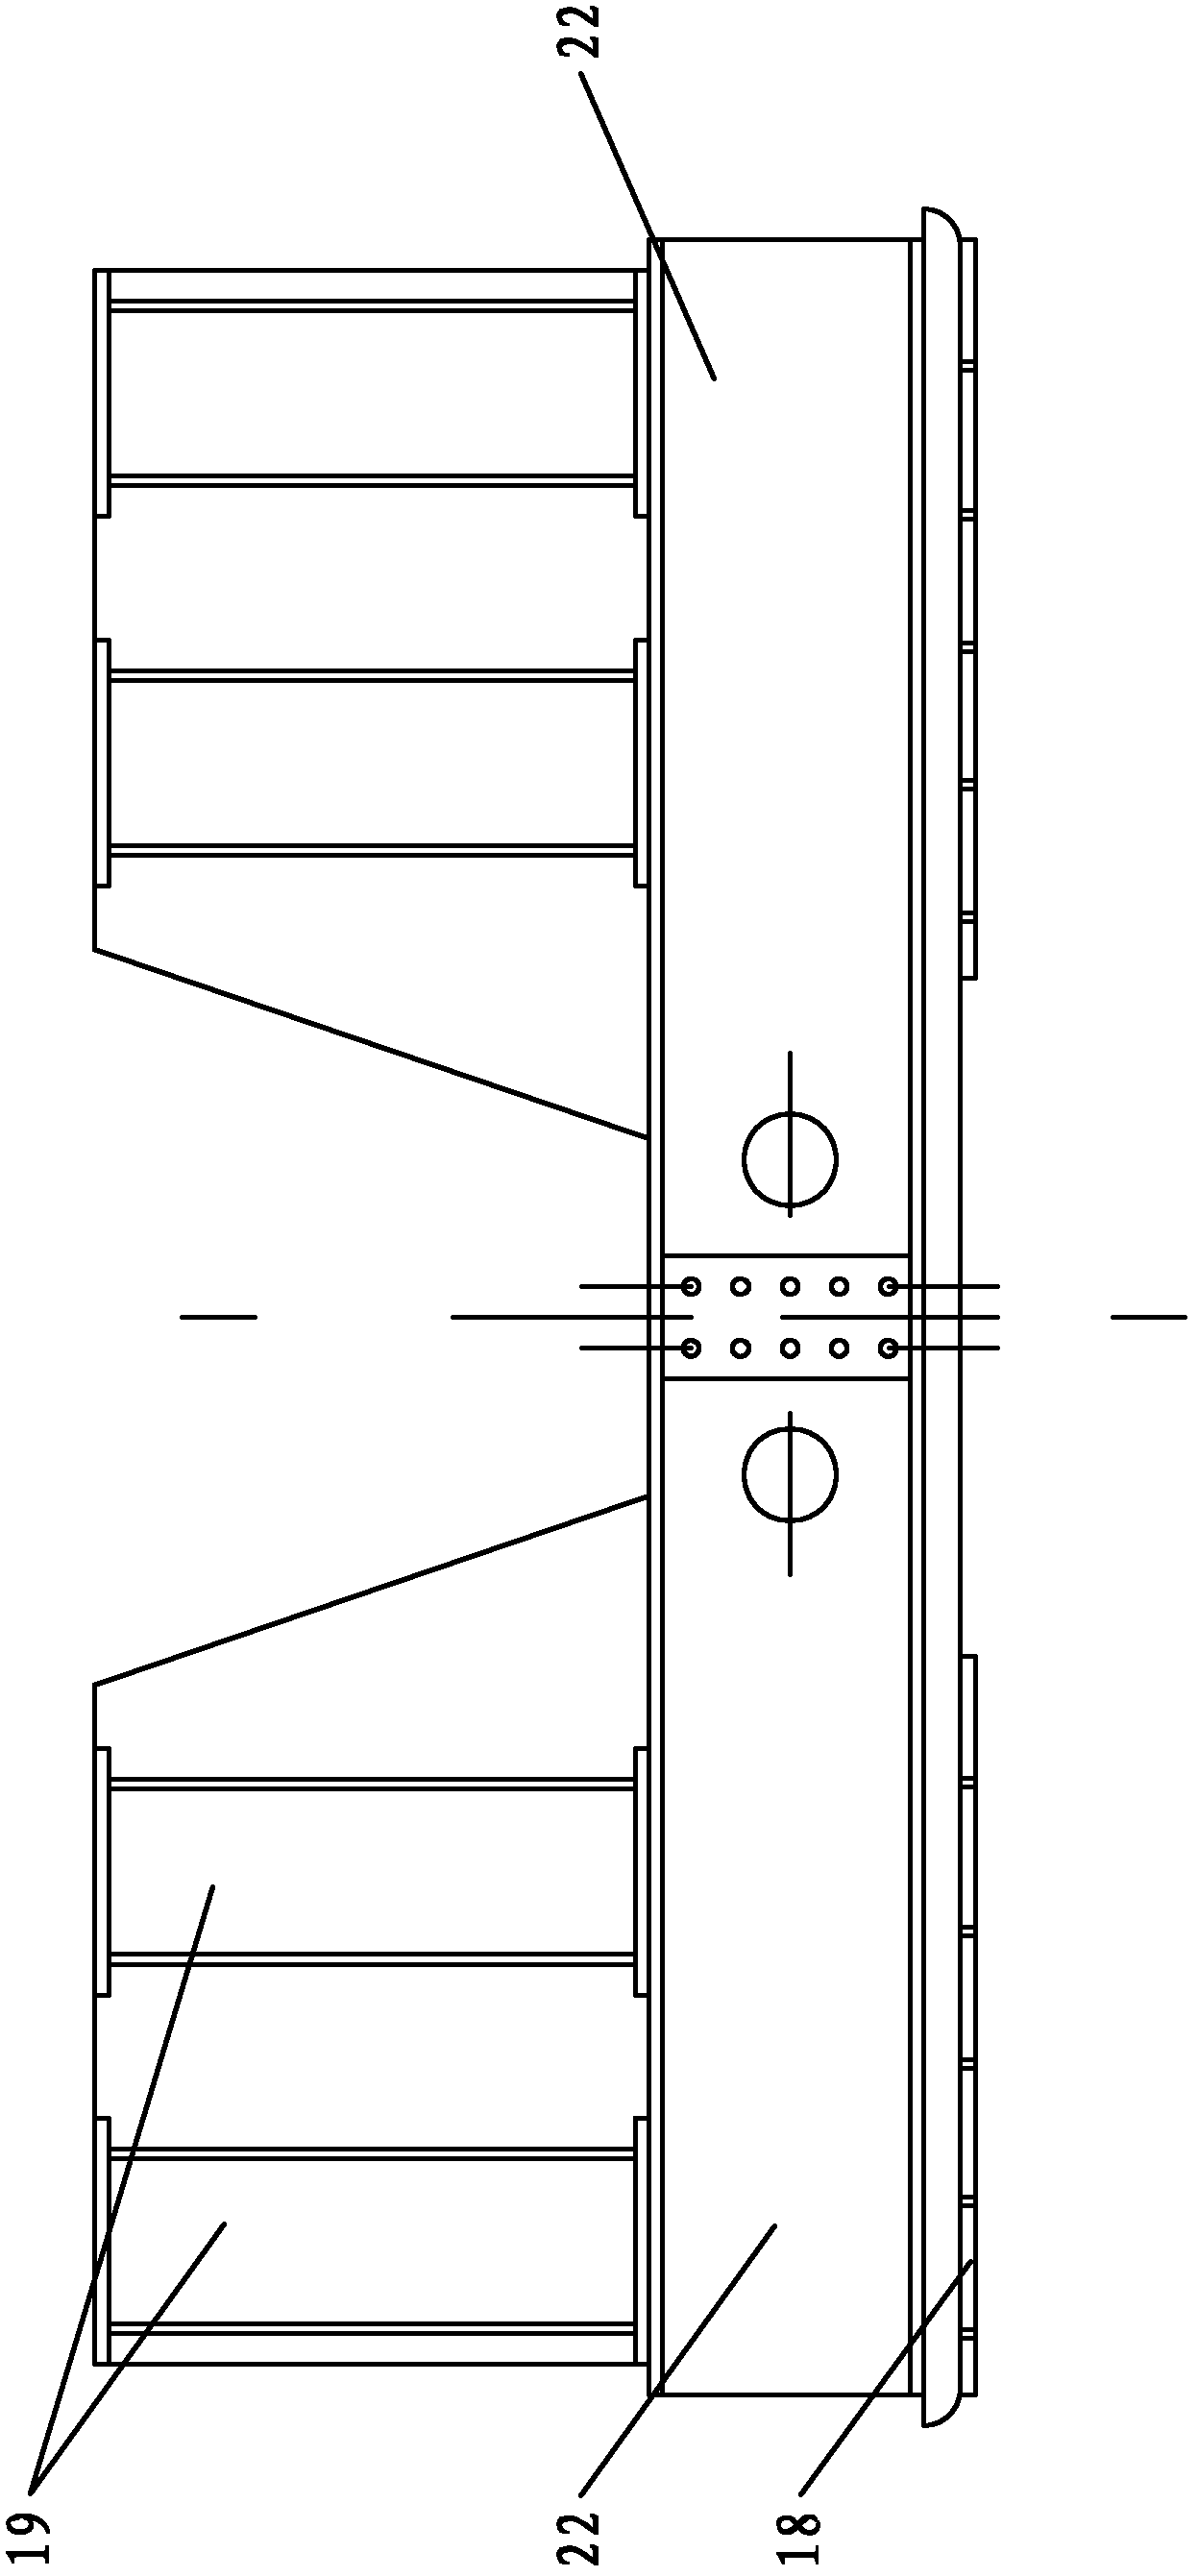 Hydraulic hoisting, slipping and emplacing method and equipment for large scale press components